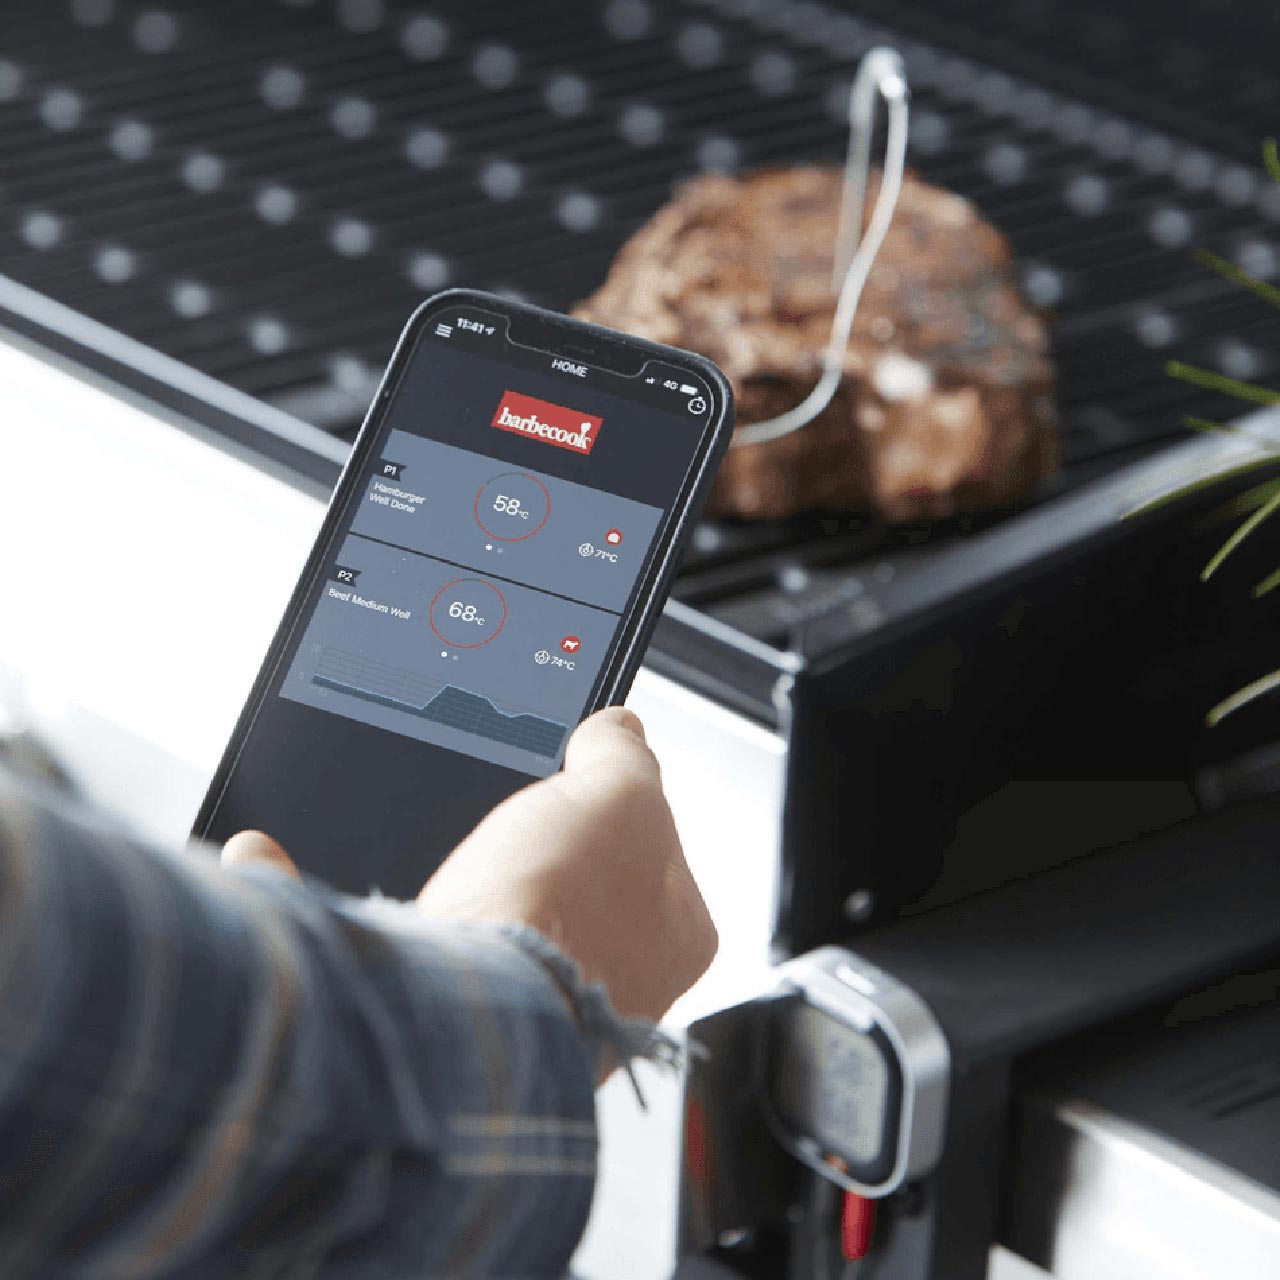 Barbecook digitales Thermometer mit App